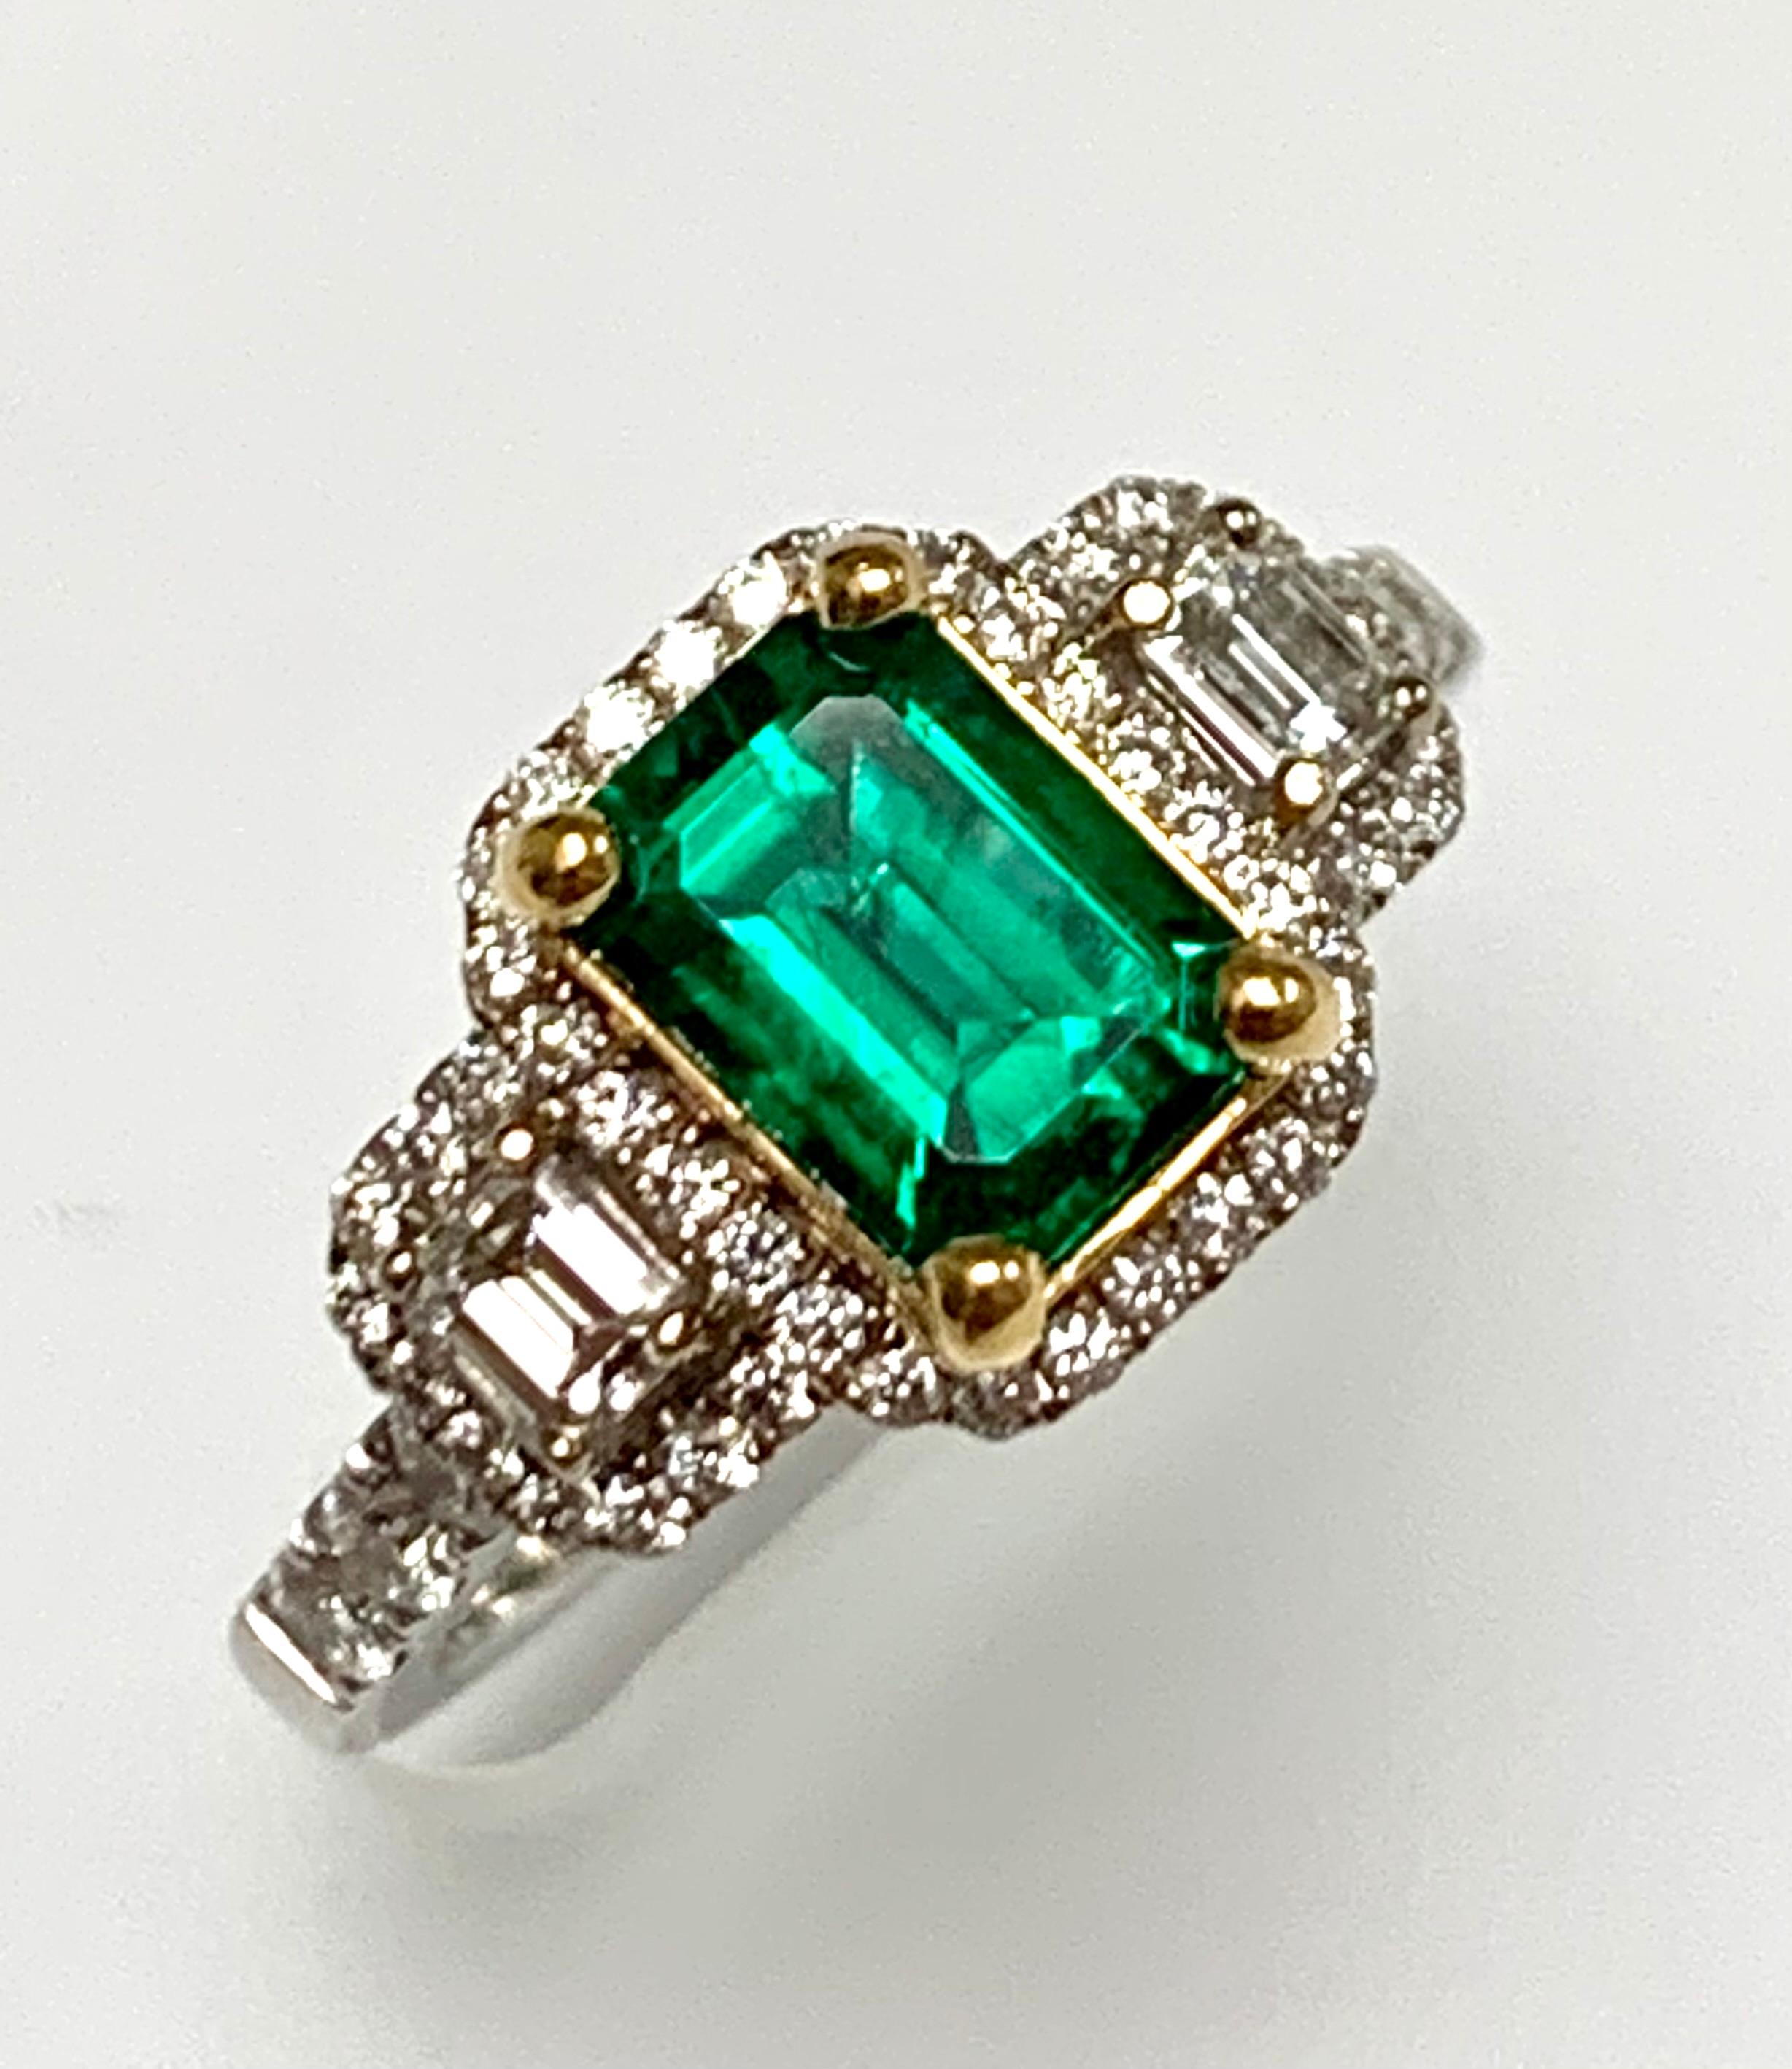 1.24 Carat emerald cut  Zambian emerald set in 18k white ring  / yellow gold basket , surrounded with  round diamonds around emerald  and pair of emerald cut diamonds in three stone style as well as diamonds set half way on the shank.